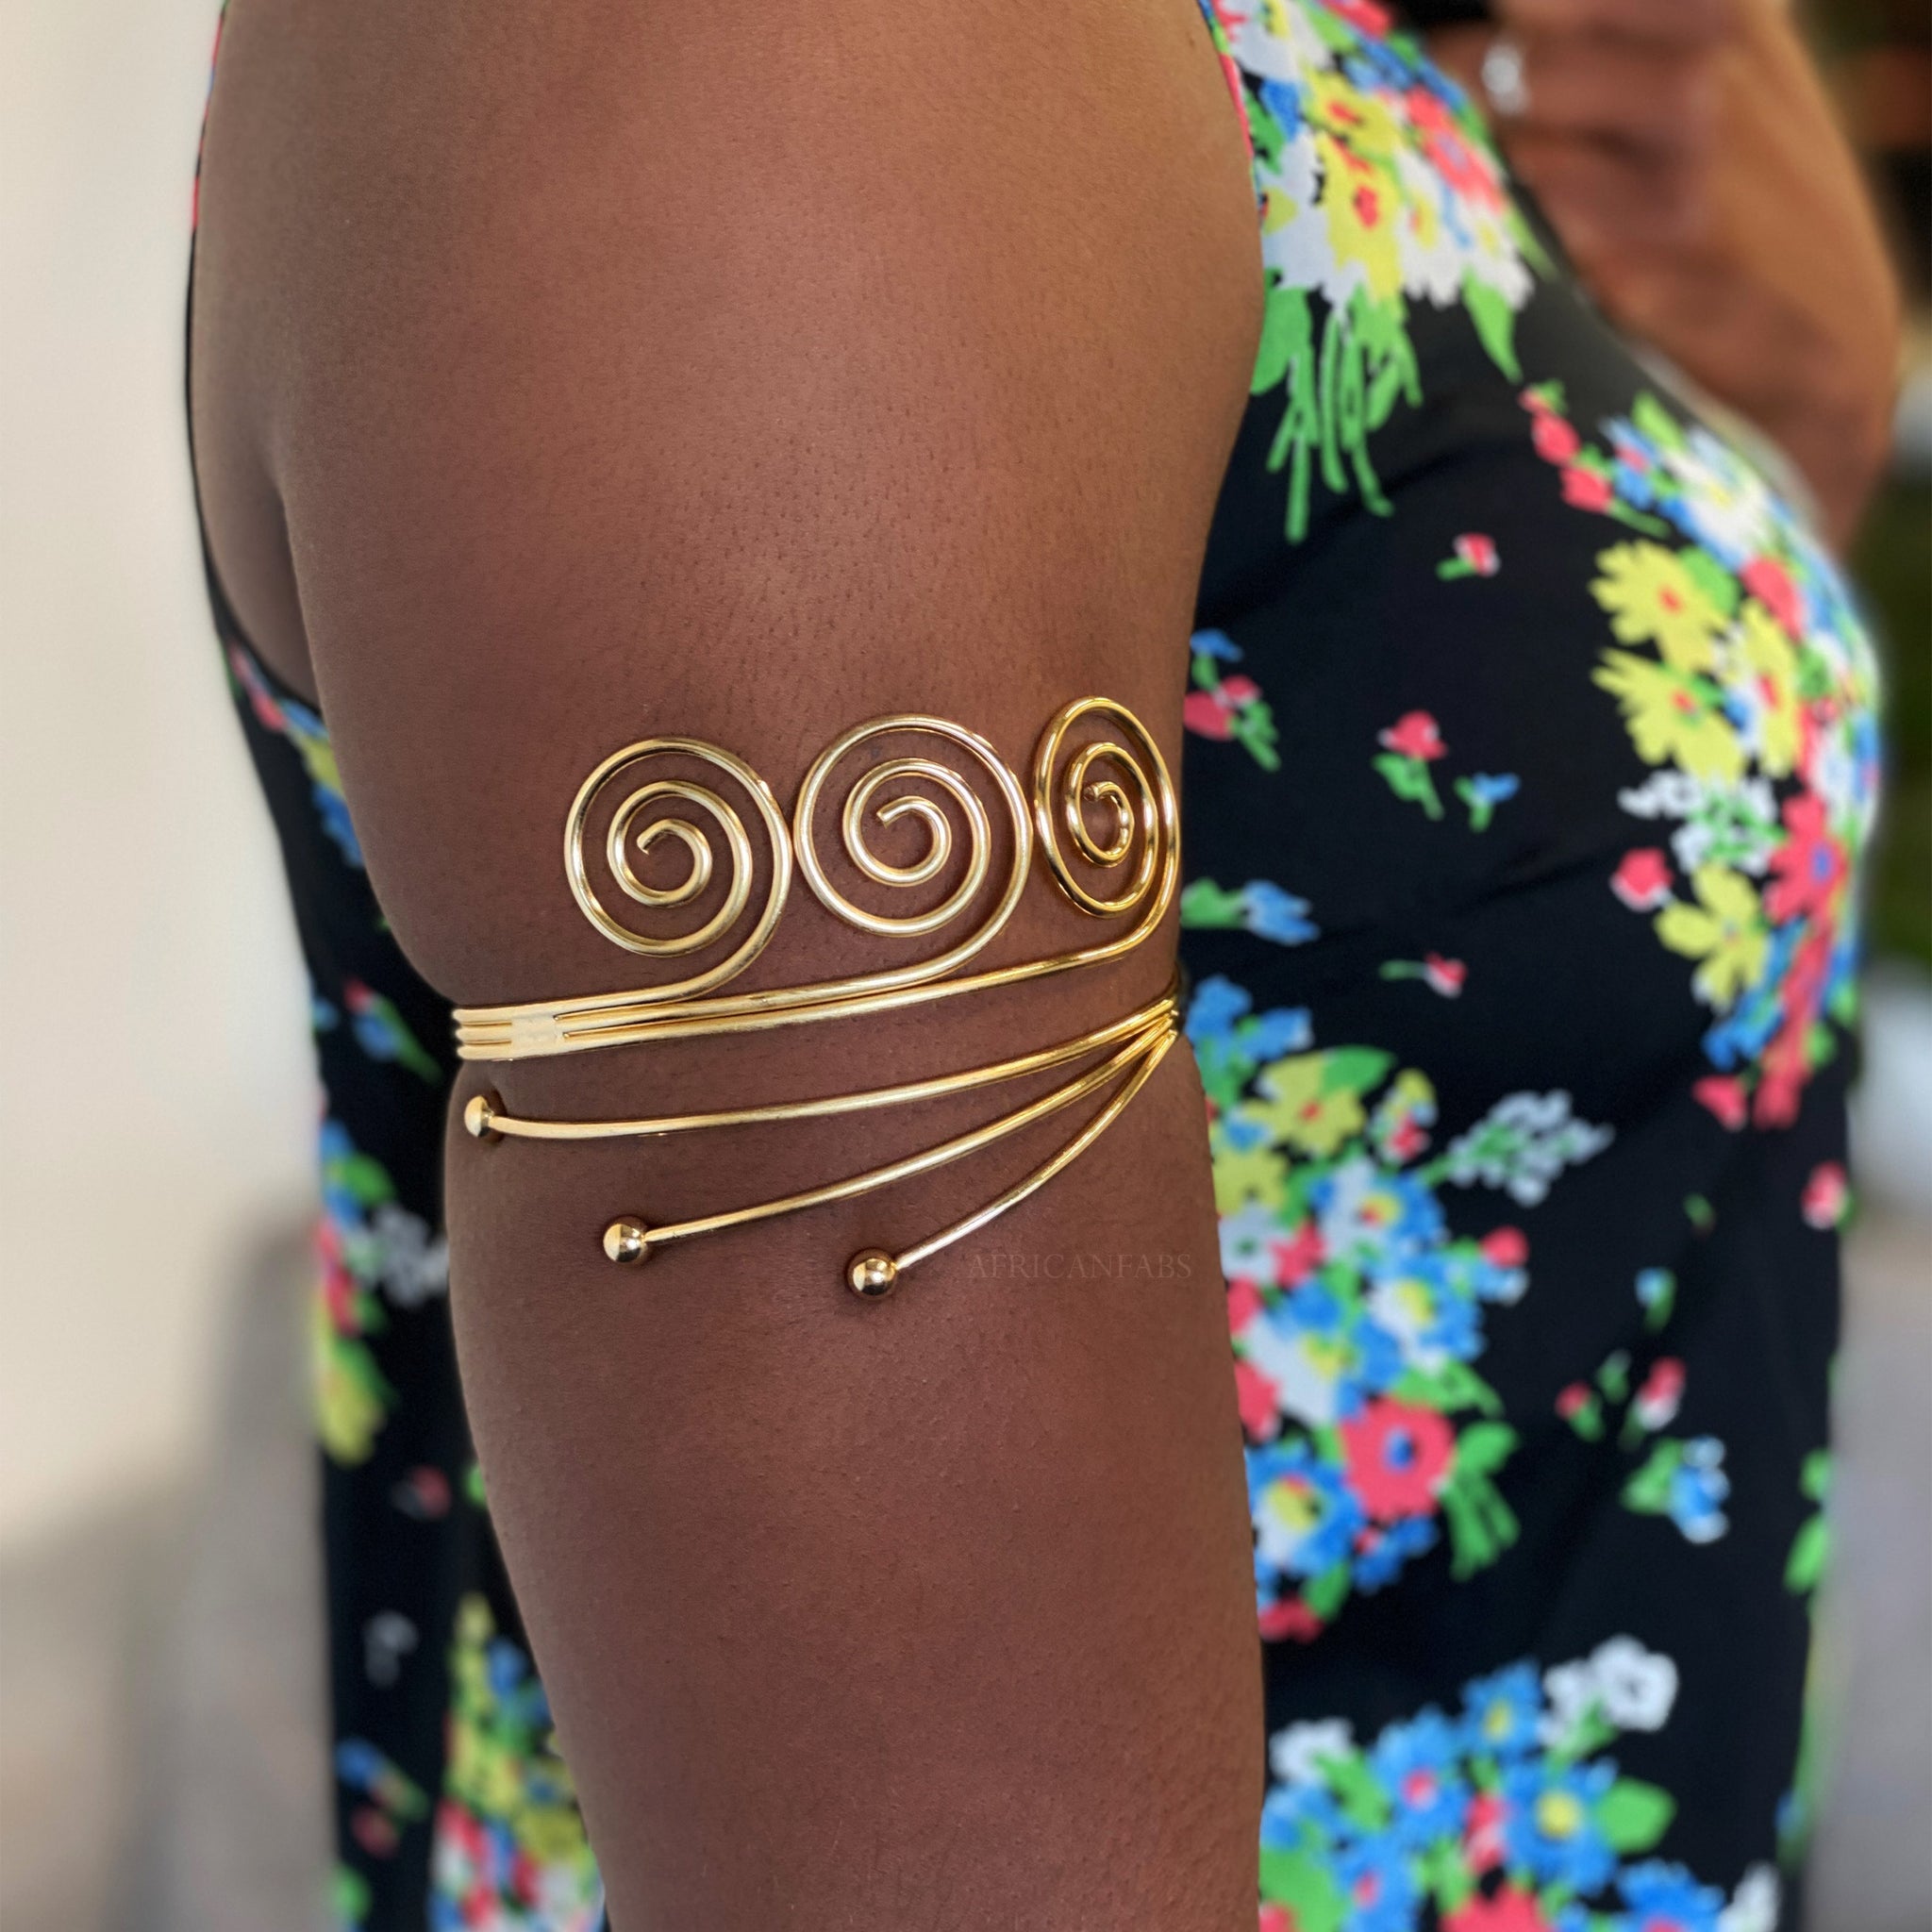 Buy Gypsy Spiral Arm Band, Upper Arm Cuff, Gold Arm Bracelet, Hammered,  Adjustable Online in India - Etsy